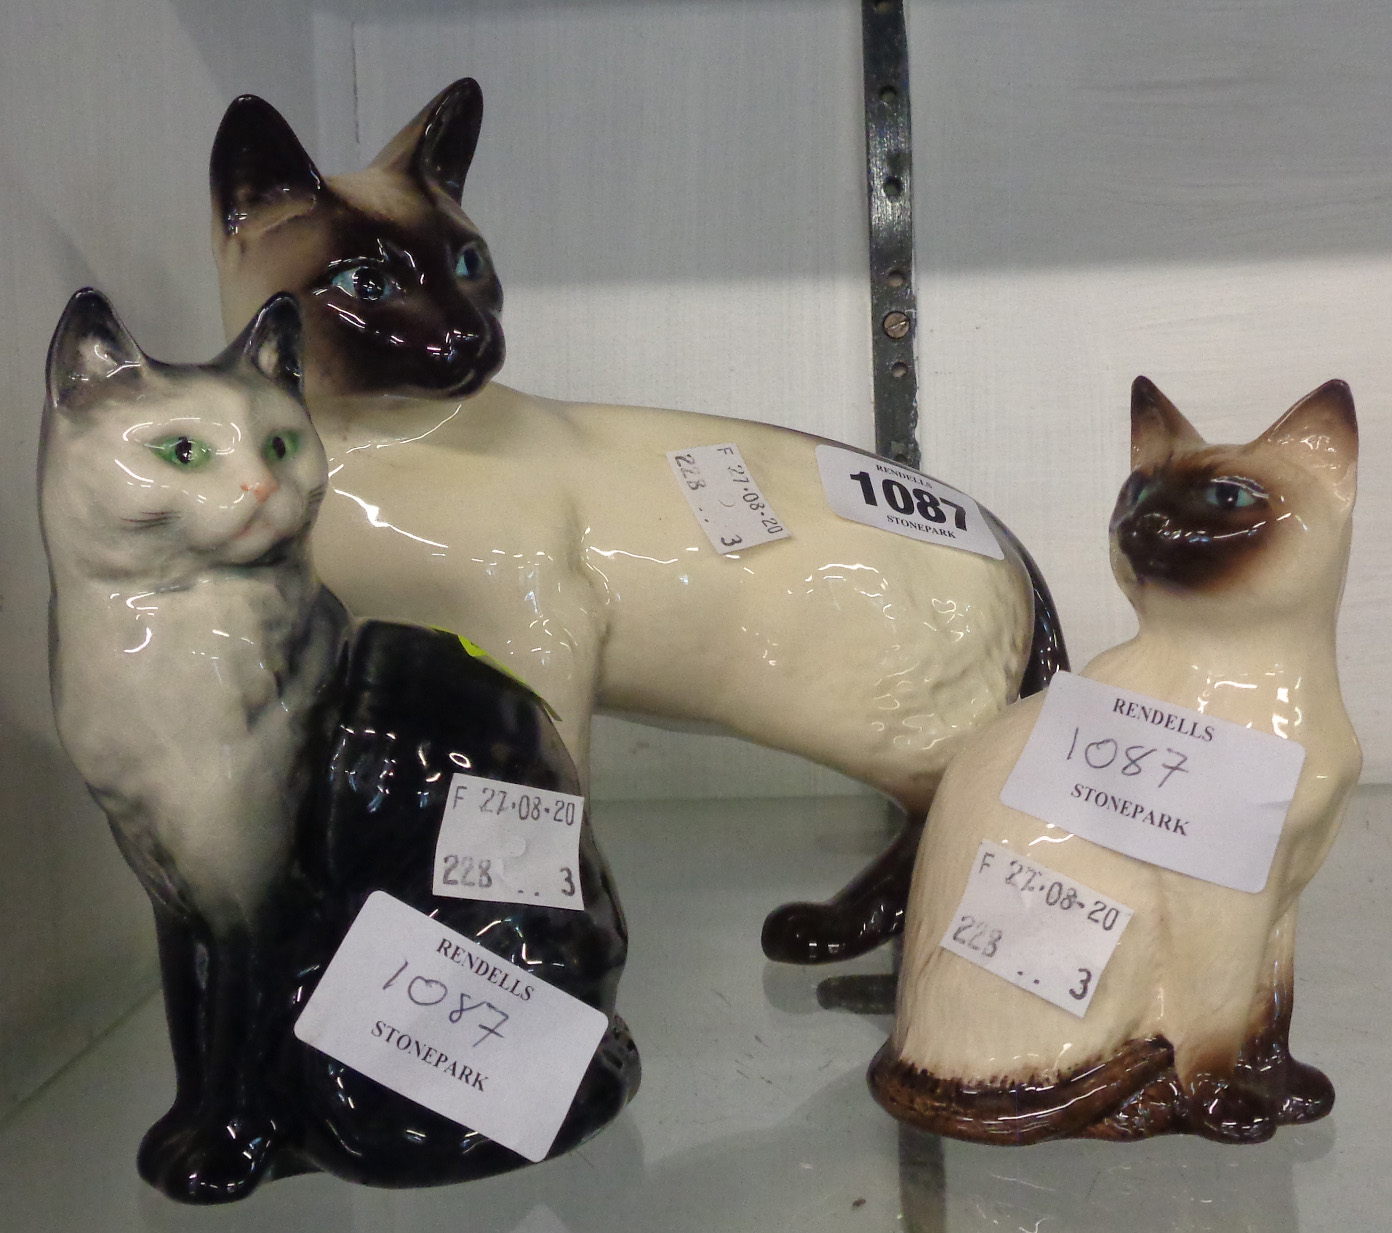 Two Beswick Siamese cats and another 1031 cat